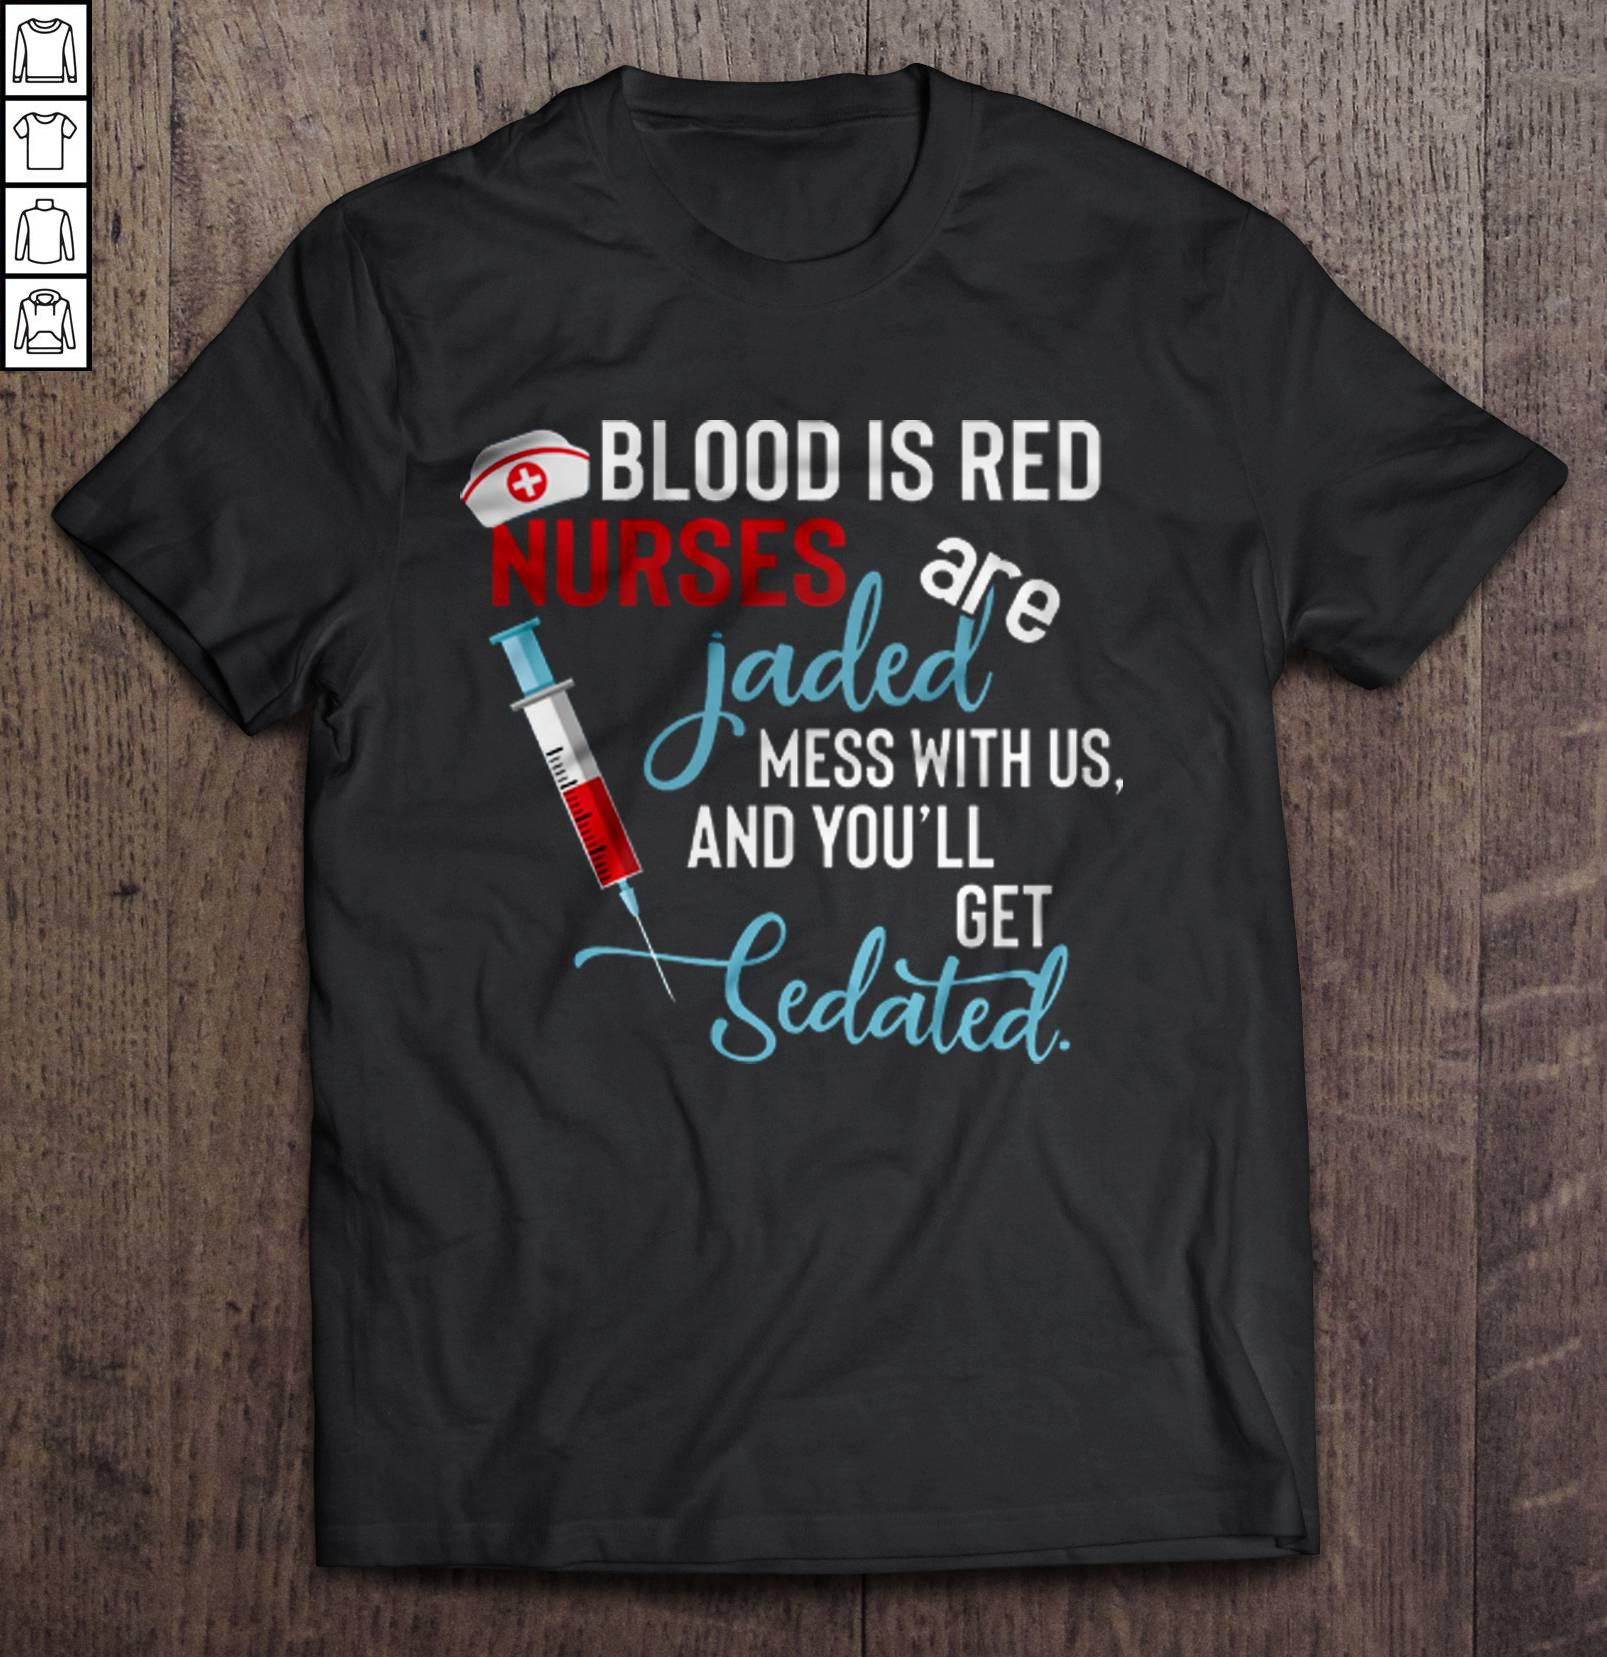 Blood Is Red Nurses Are Jaded Mess With Us And You’ll Get Sedated Black2 Tee T-Shirt